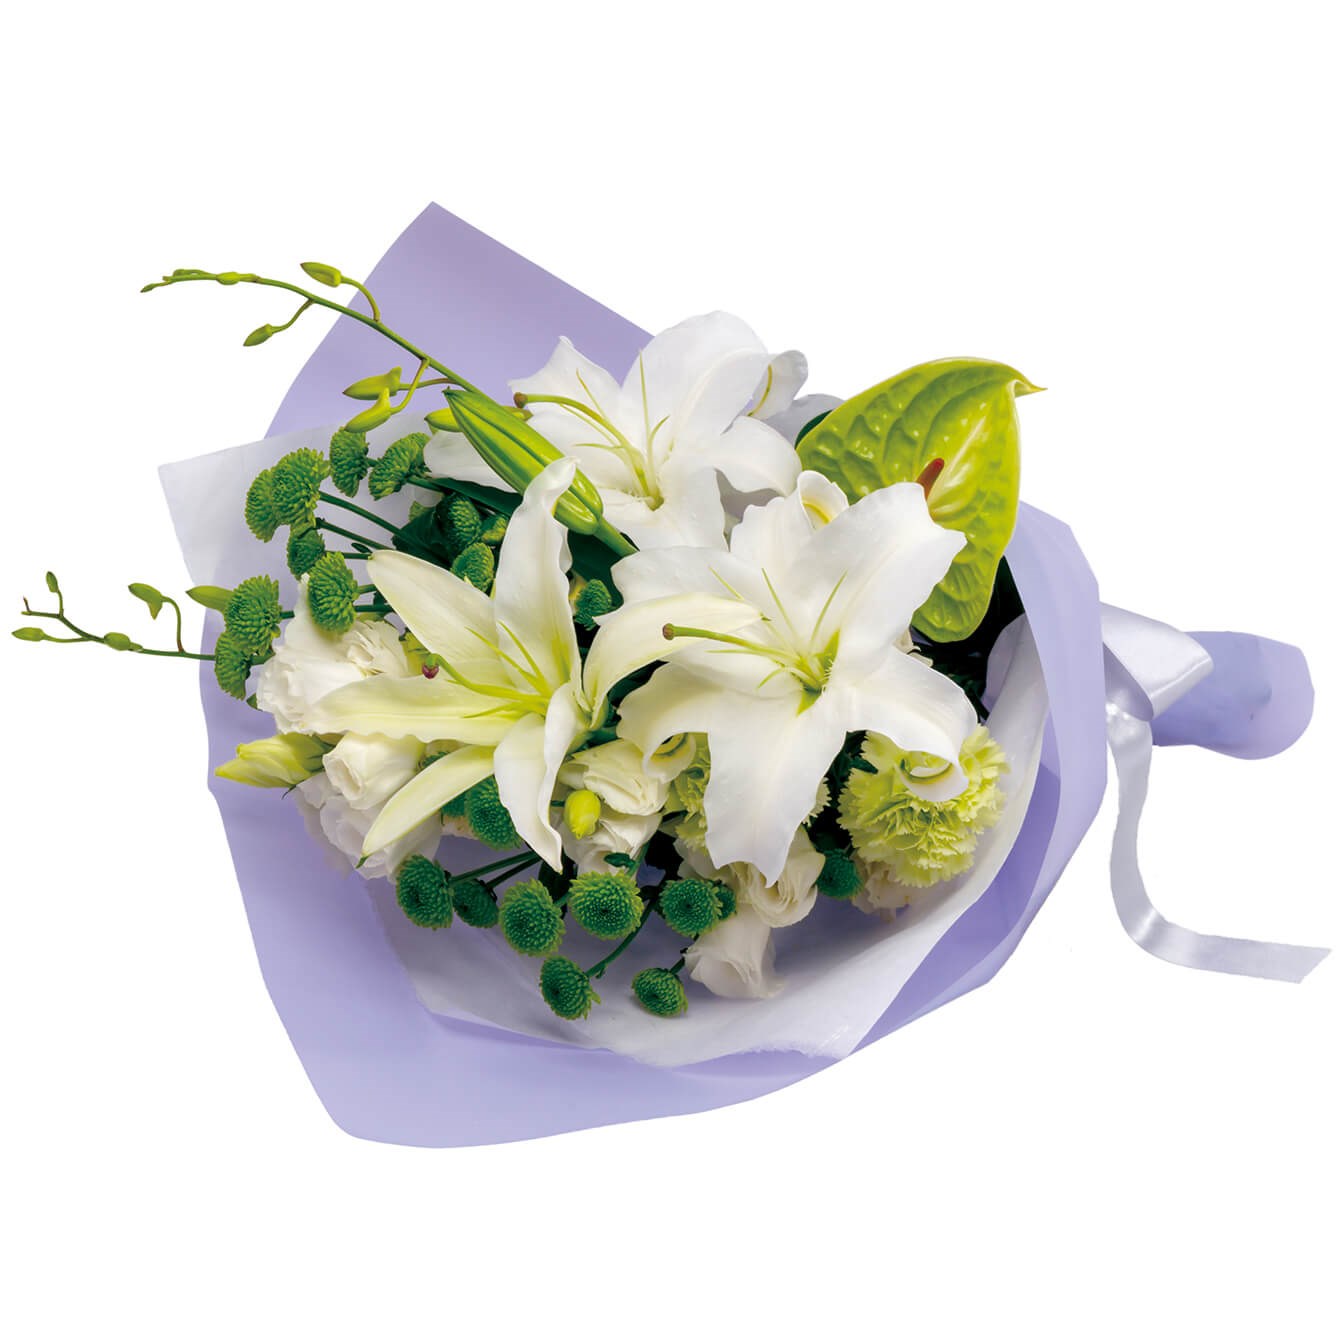 Funeral bouquet in white and green